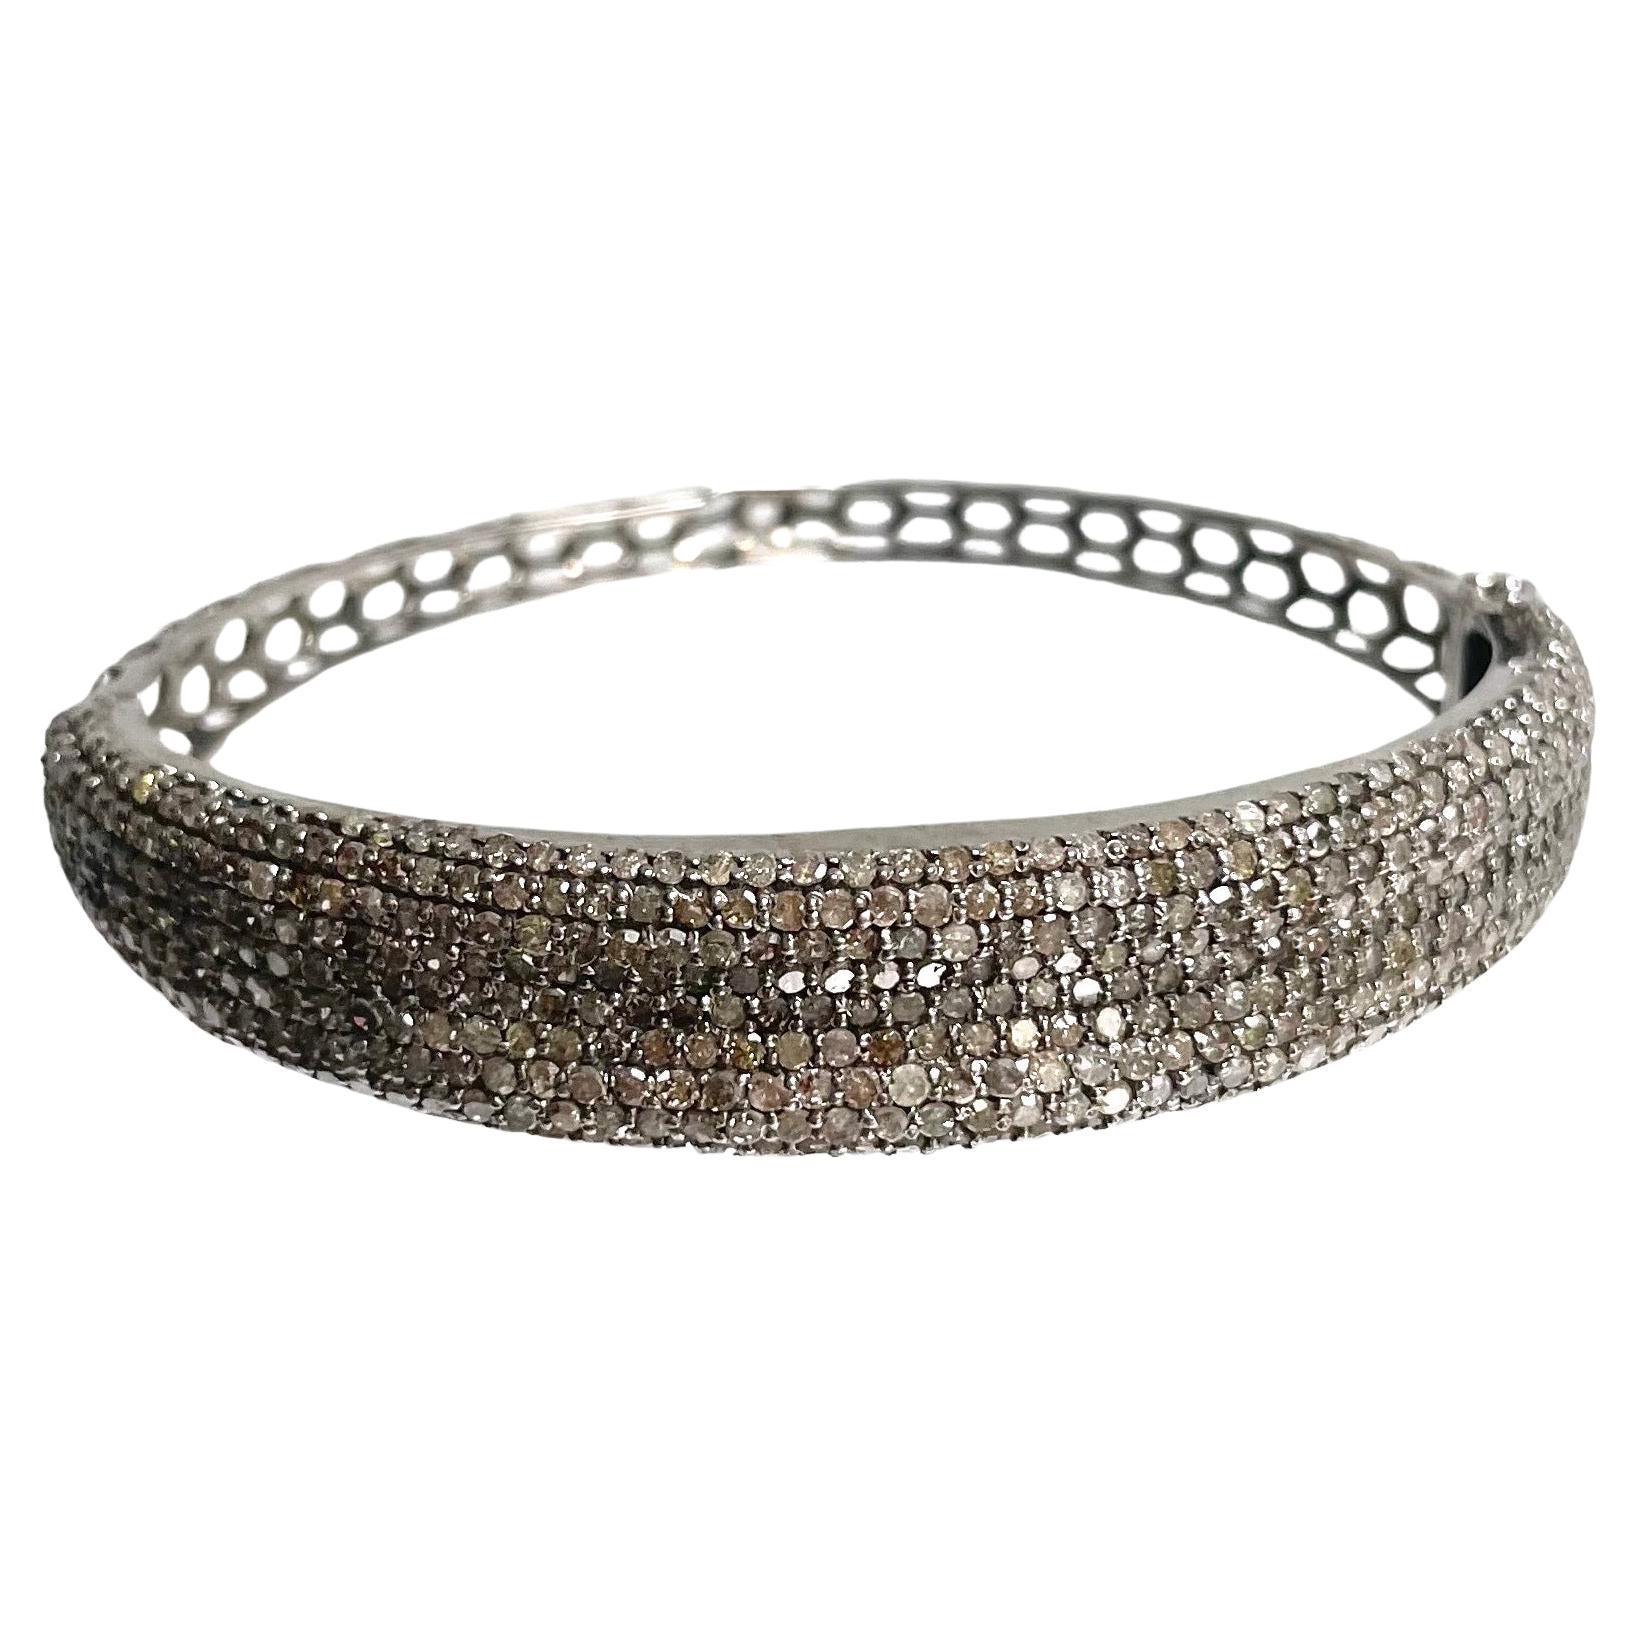 Description
Twinkling champagne diamonds sparkle with soft sophistication creating an elegant yet subtle and chic easy to wear bracelet. This hinged bangle is thoughtfully designed in an oval shape allowing the beauty of the 7.25 carats of diamond